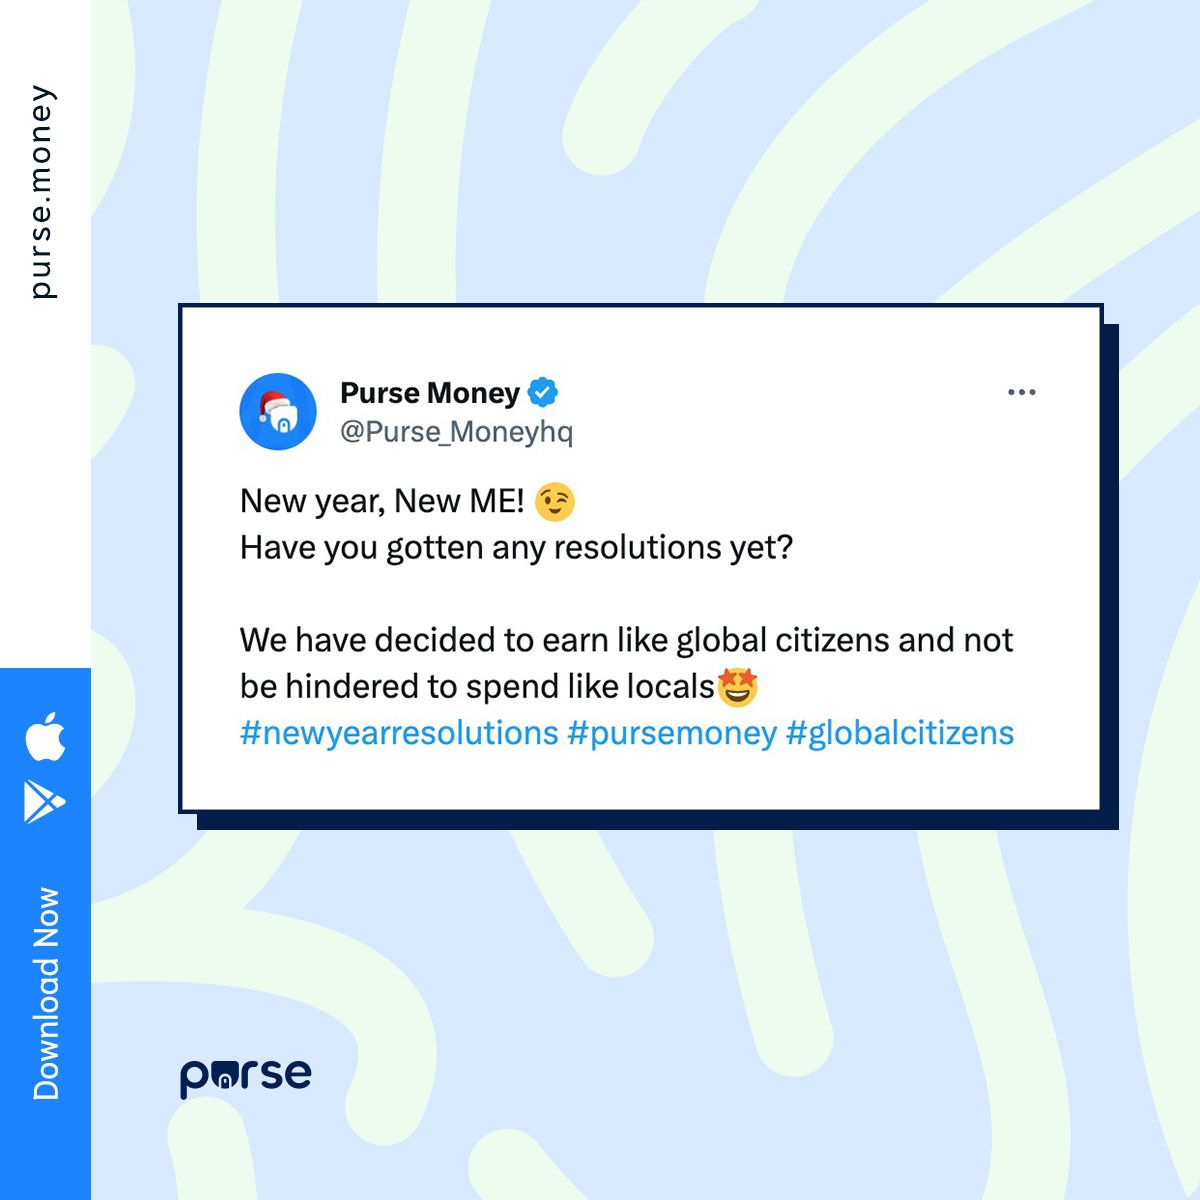 New year, same savvy spender, but with a twist!🚀 
In 2024, we're resolving to earn like locals but spend like global citizens.
Got your Purse account ready for a year of financial adventures? 
#PurseMoney #NewYearResolution #InternationalAccounts